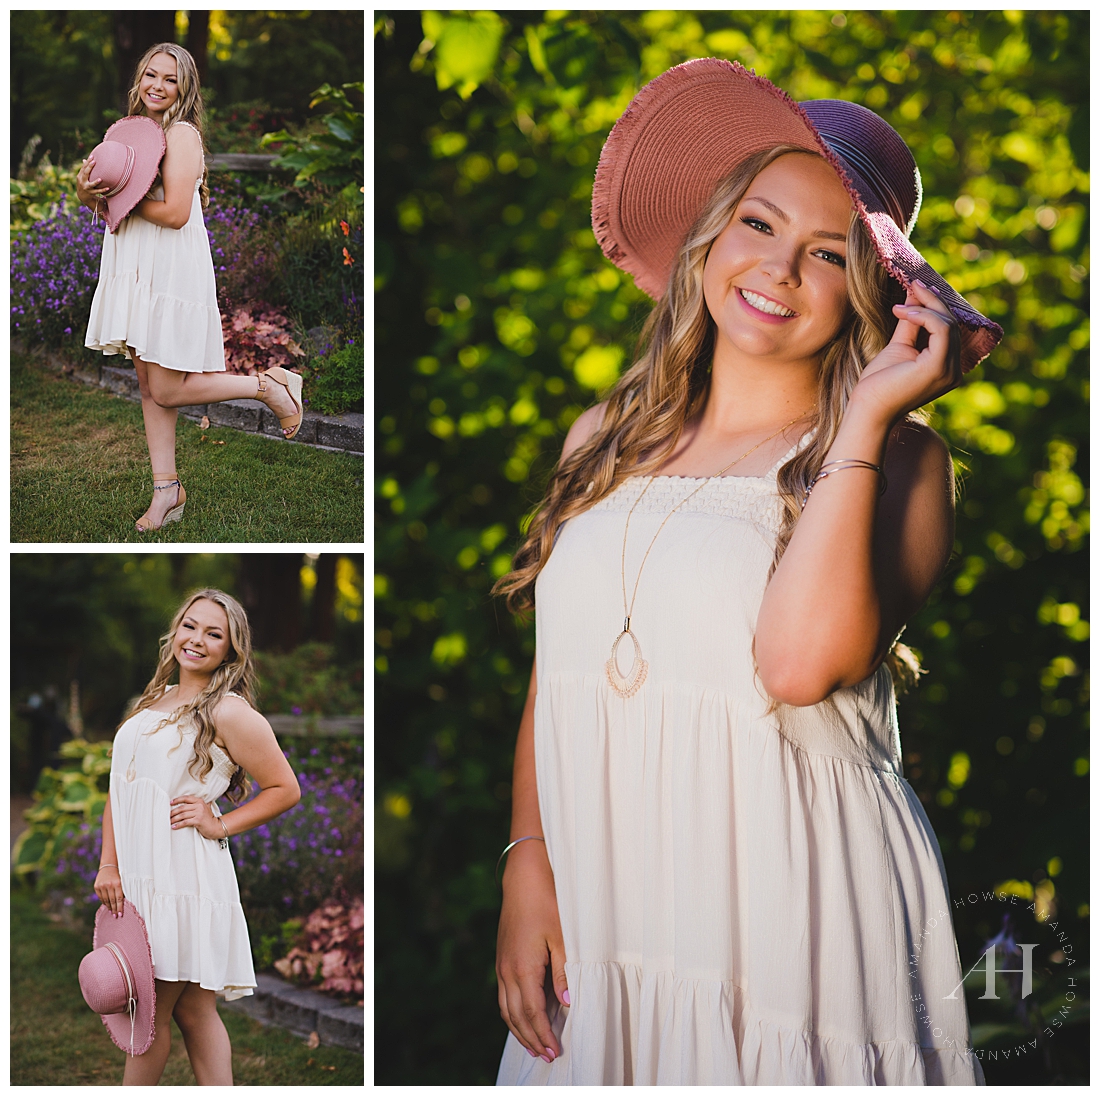 Cute Summer Senior Portraits | How to style a floppy hat and dress for your senior portraits, pose ideas for senior girls, cute outdoor senior portraits, the best Tacoma locations for senior portraits | Photographed by the Best Tacoma Senior Photographer Amanda Howse